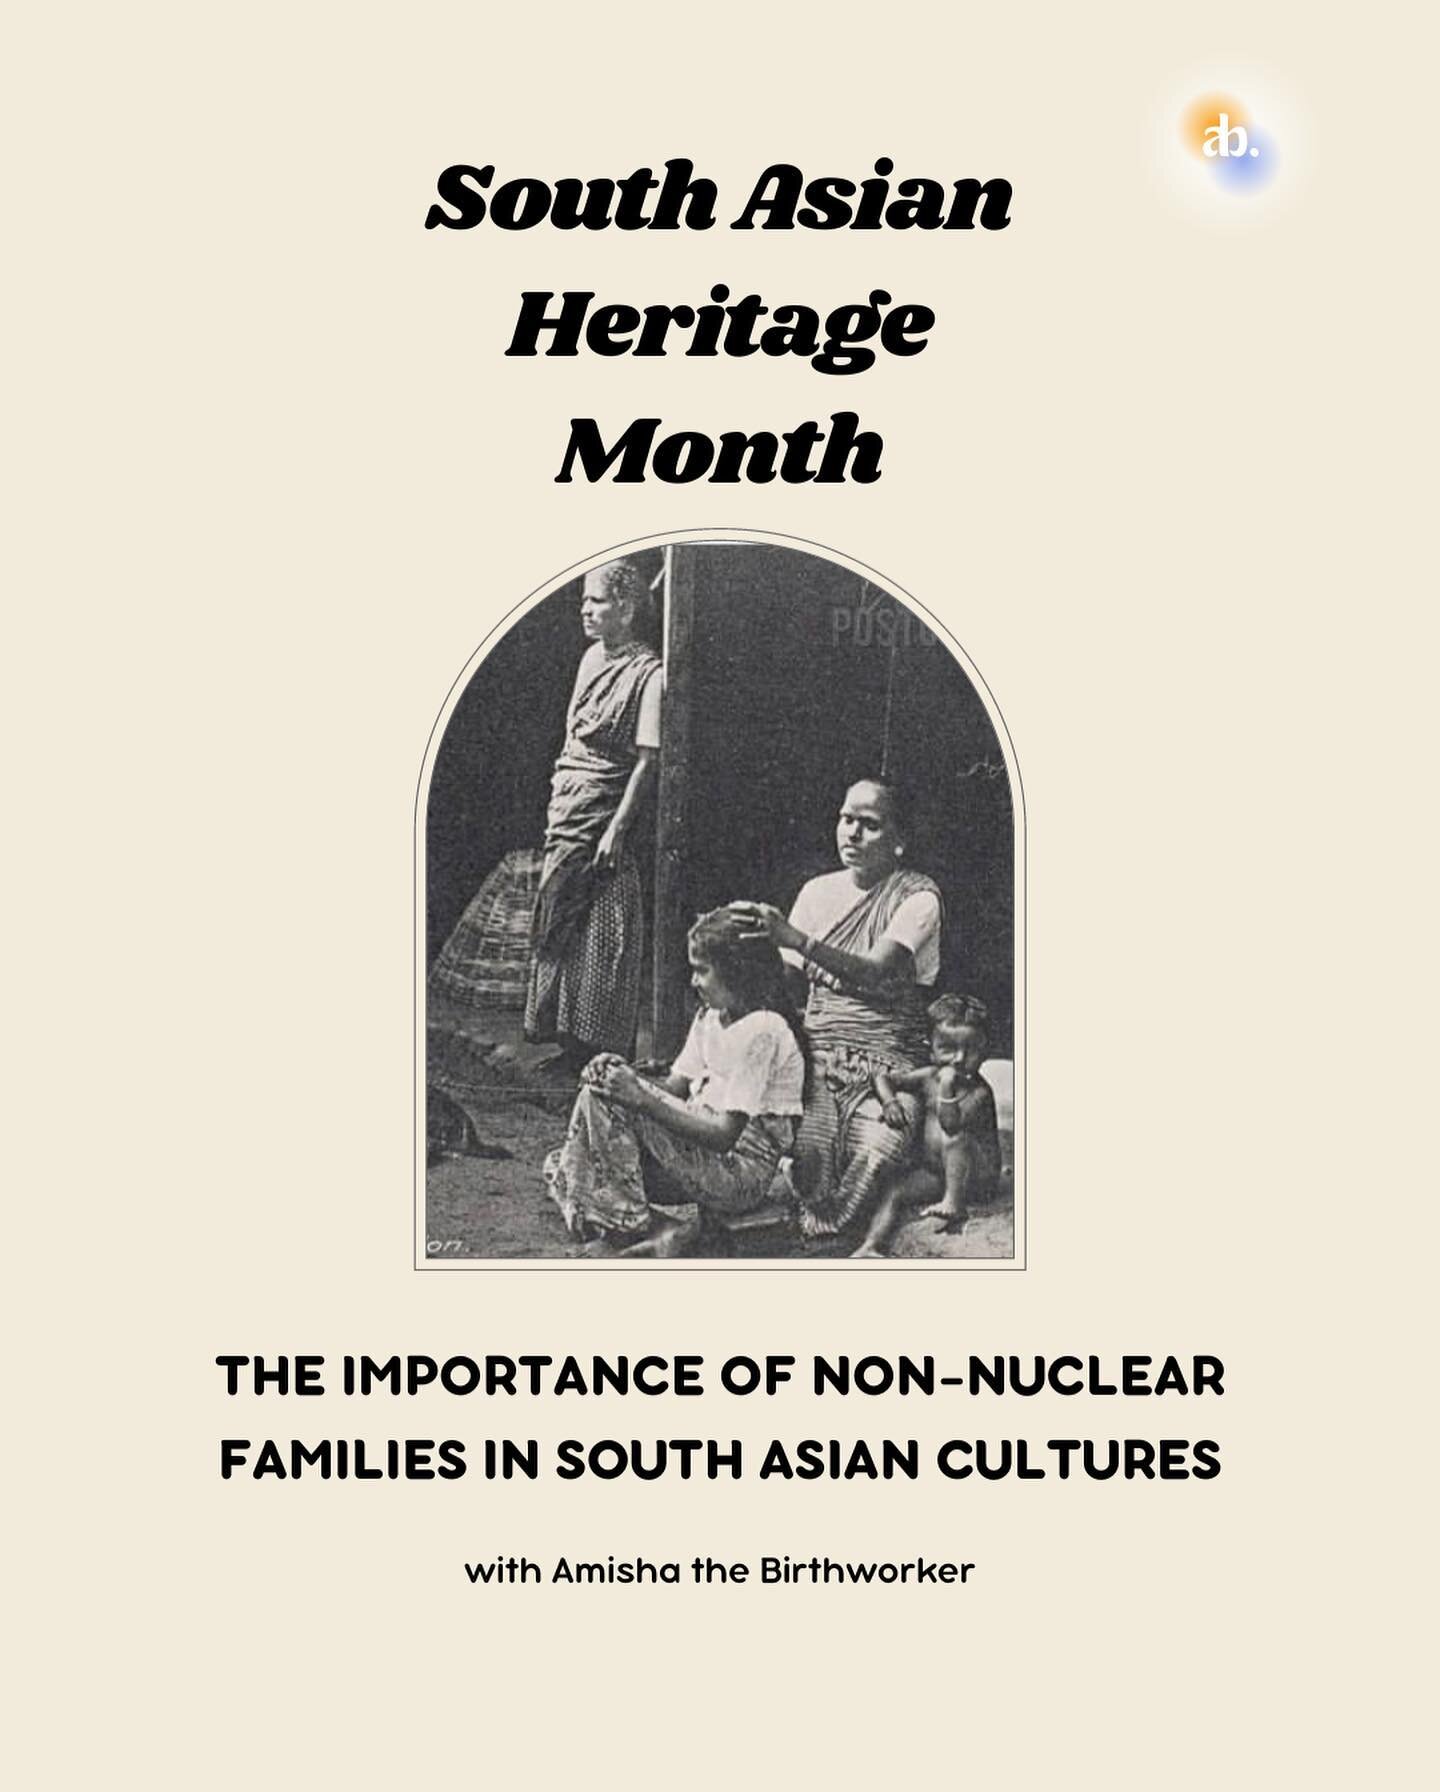 The importance of non-nuclear families in South Asian cultures.

In many South Asian cultures children are always cared for not just by their parents, but by the whole community. The responsibility for child rearing is shared by the group, and everyo